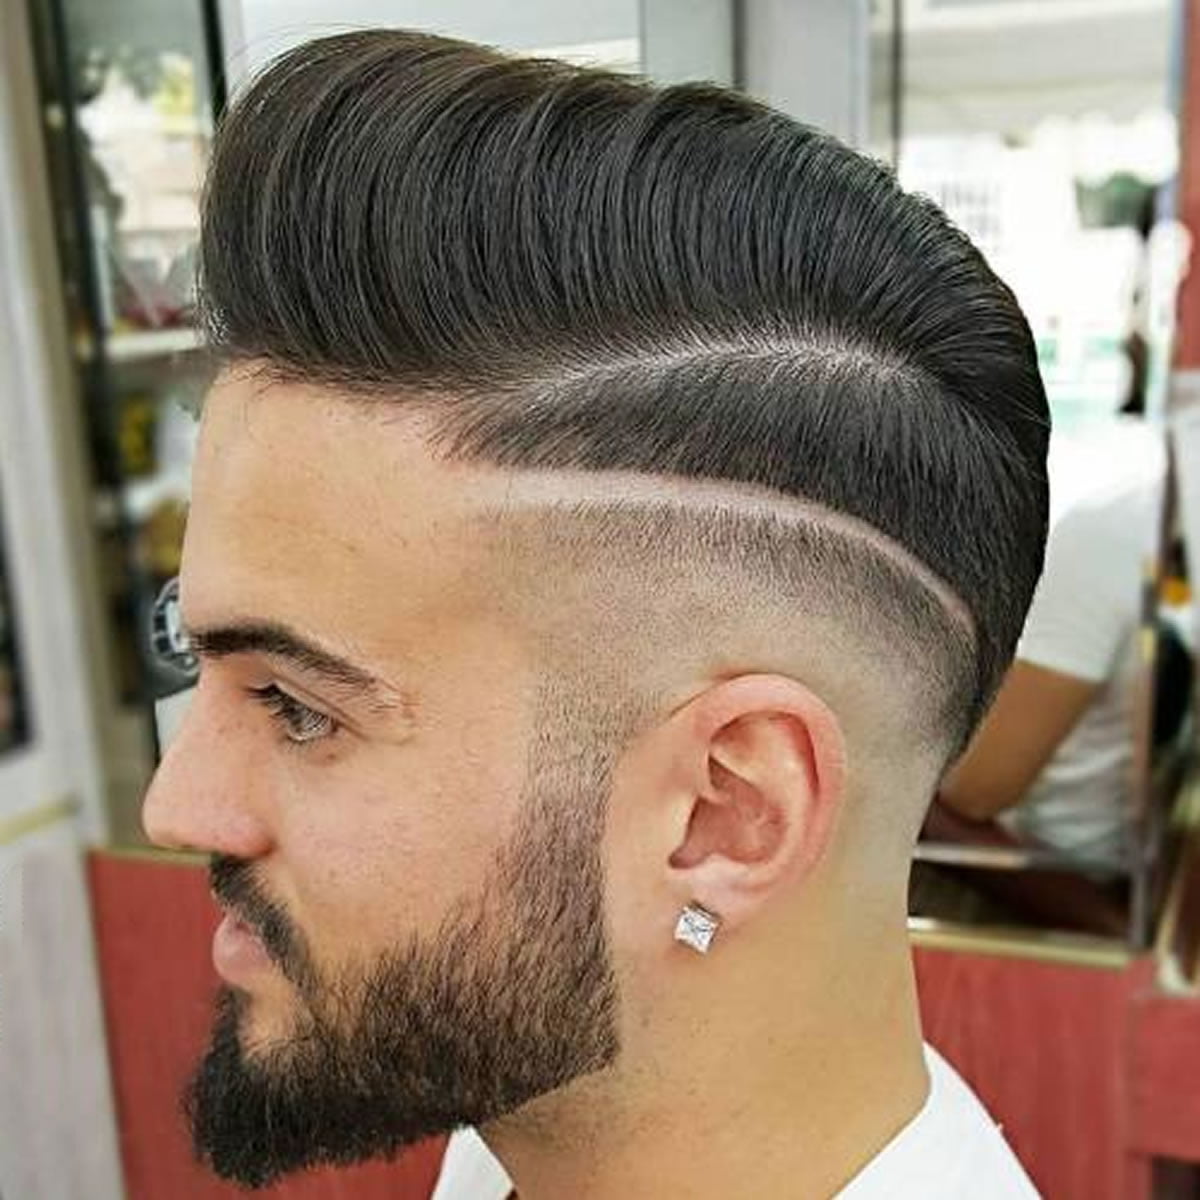 Pompadour with shaved side design for 2018 – HAIRSTYLES